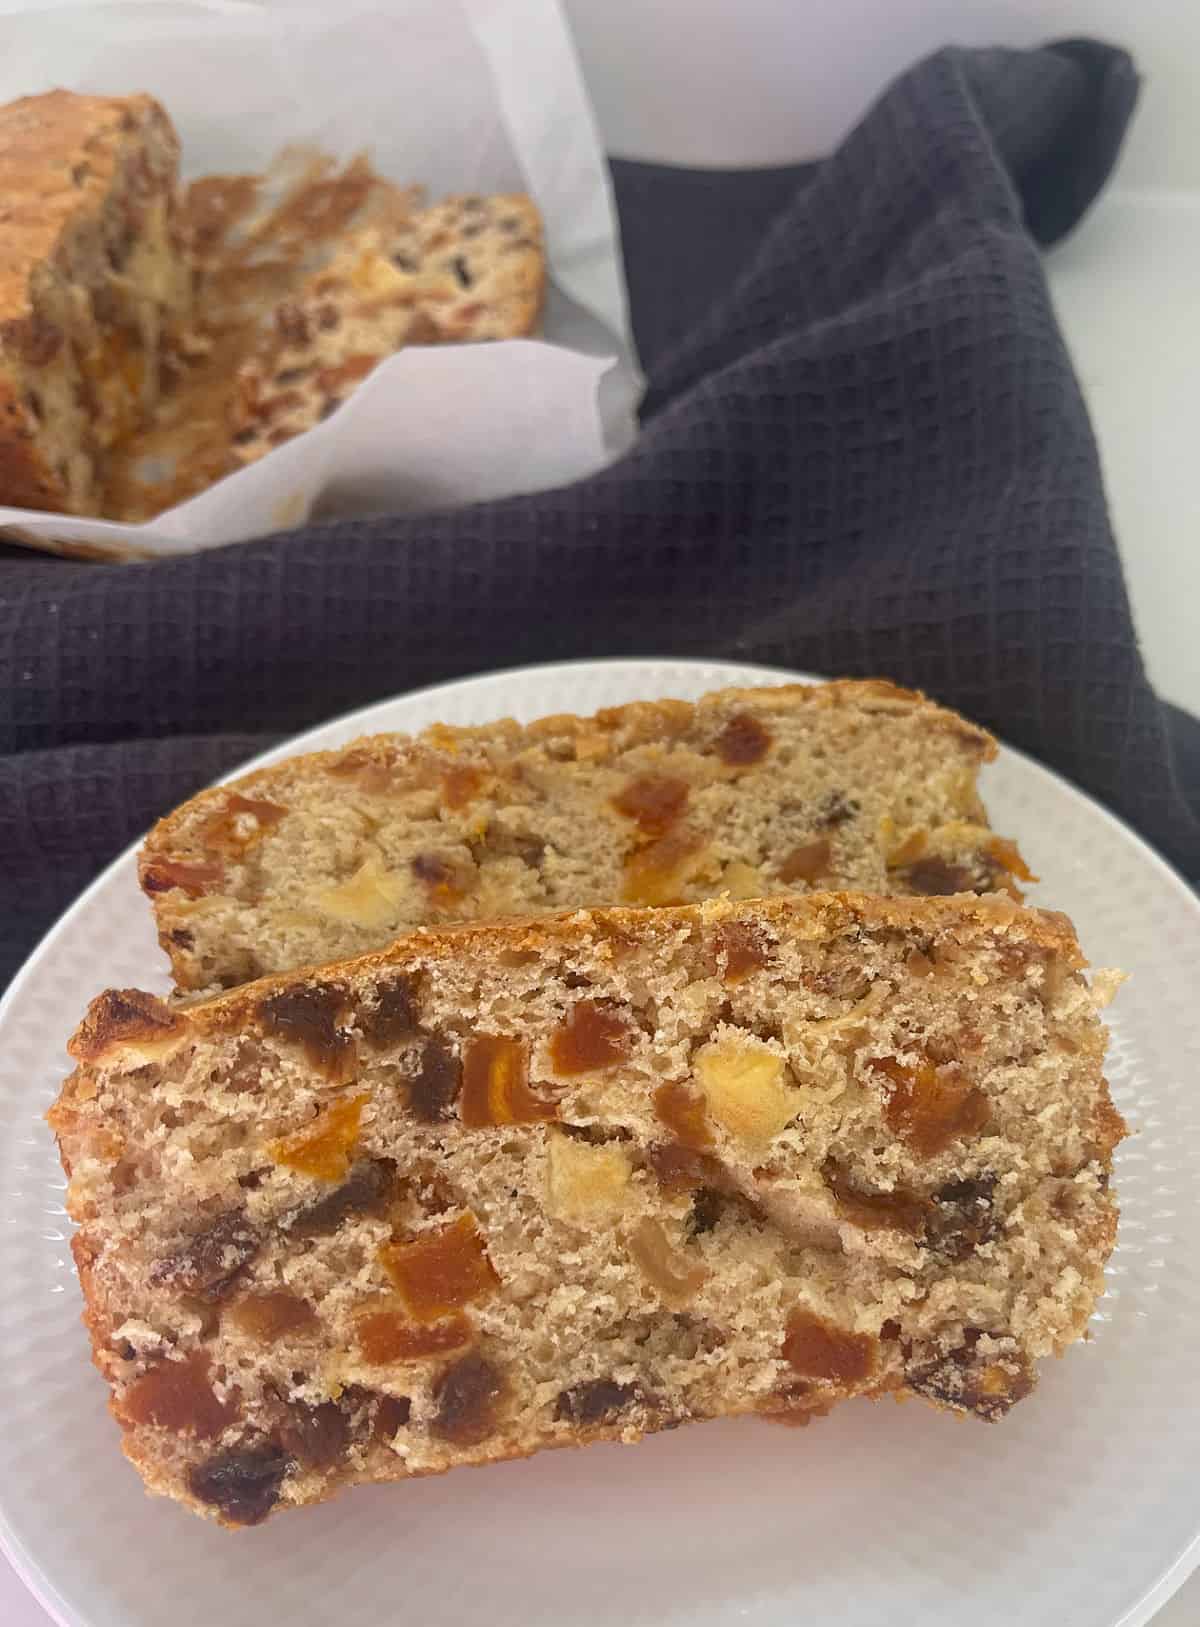 Two slices of Fruit Loaf made in a thermomix on a white plate.